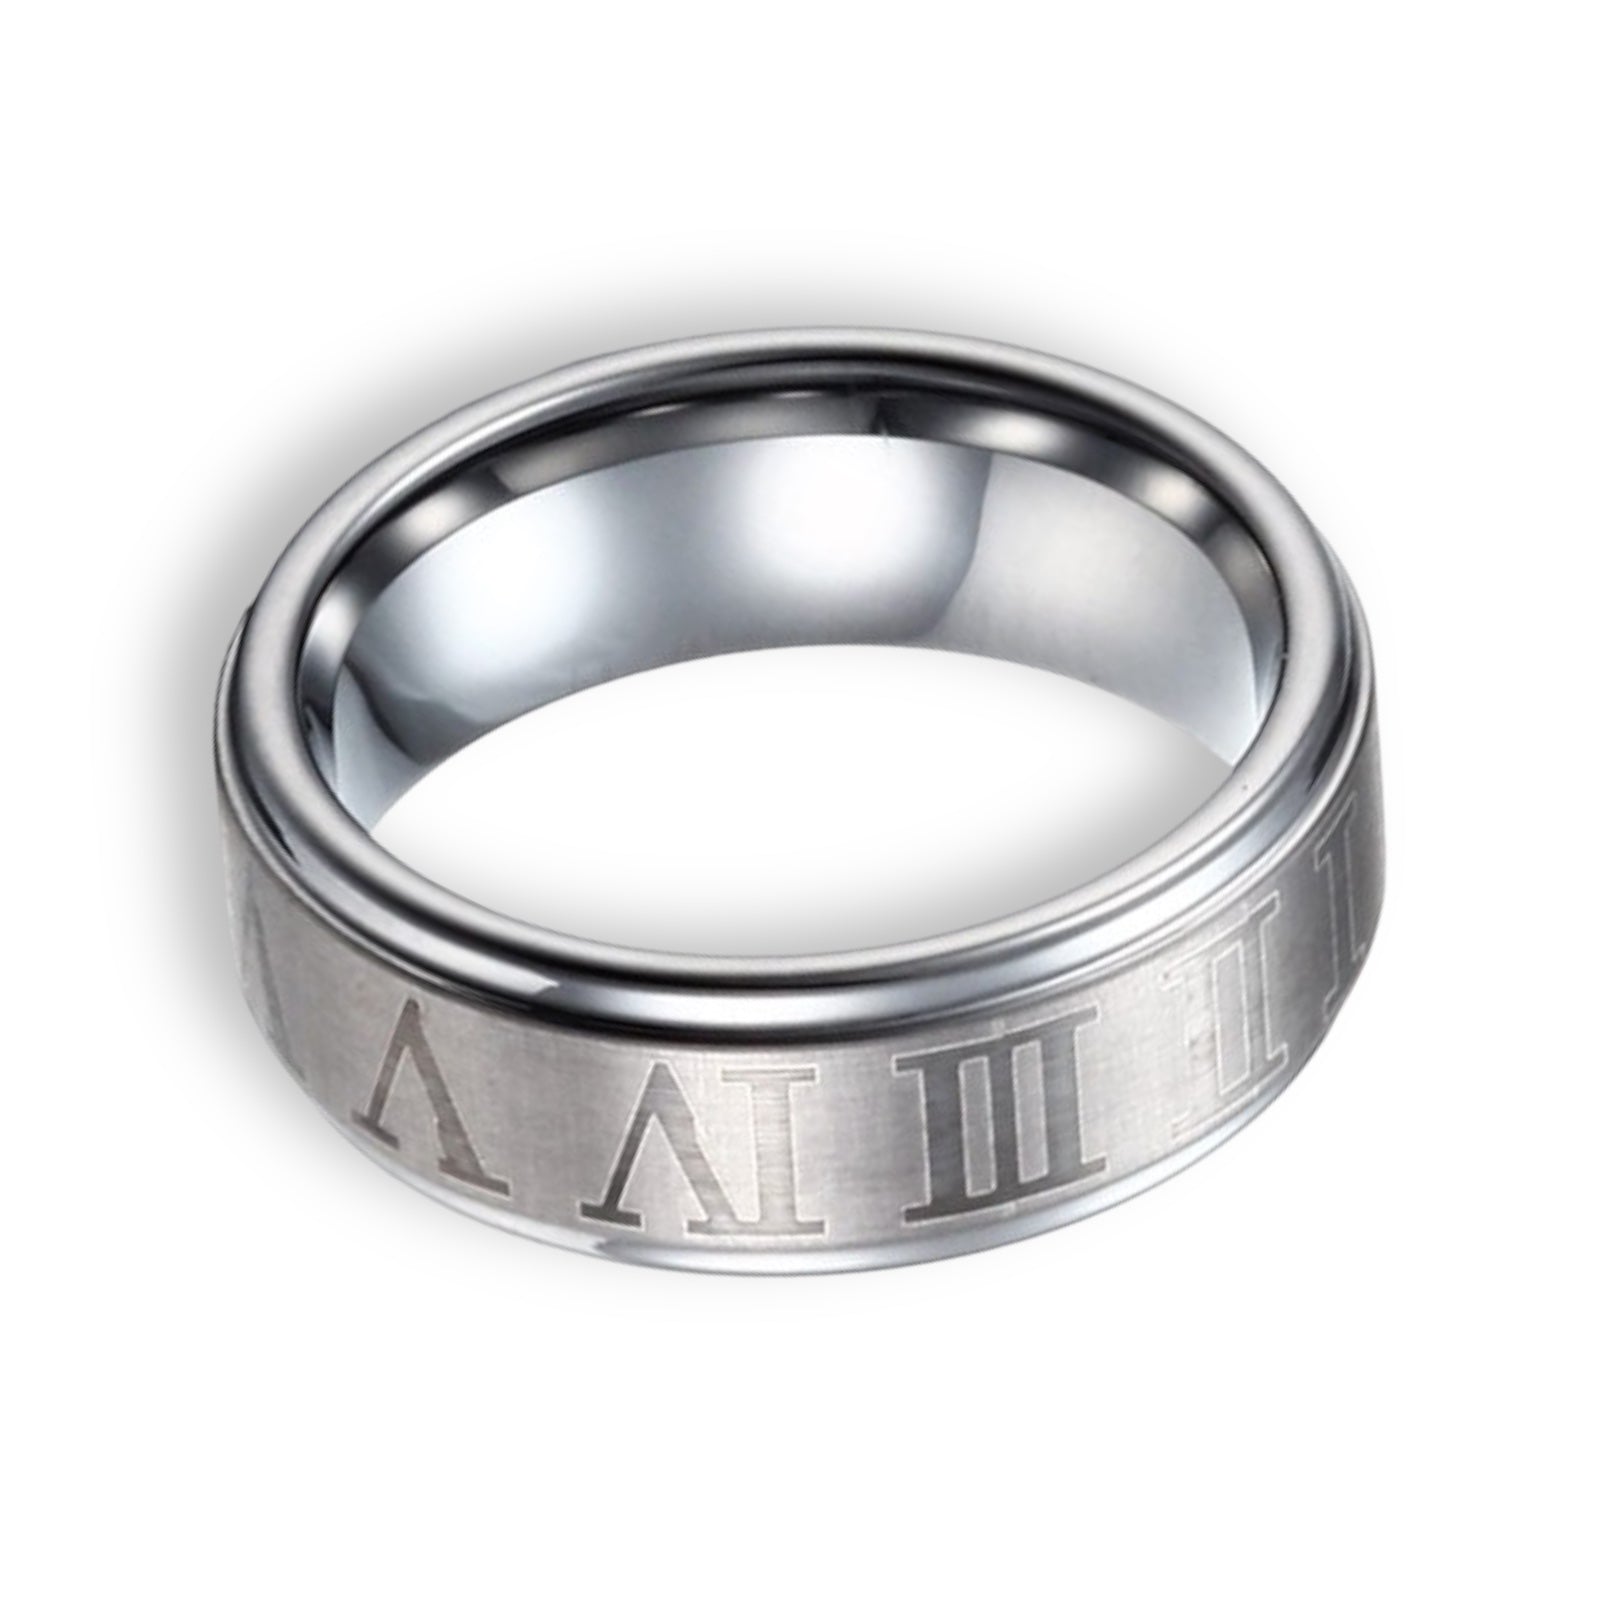 Tungsten Ring Romantic Roman Numeral Etched Silver Brushed Band